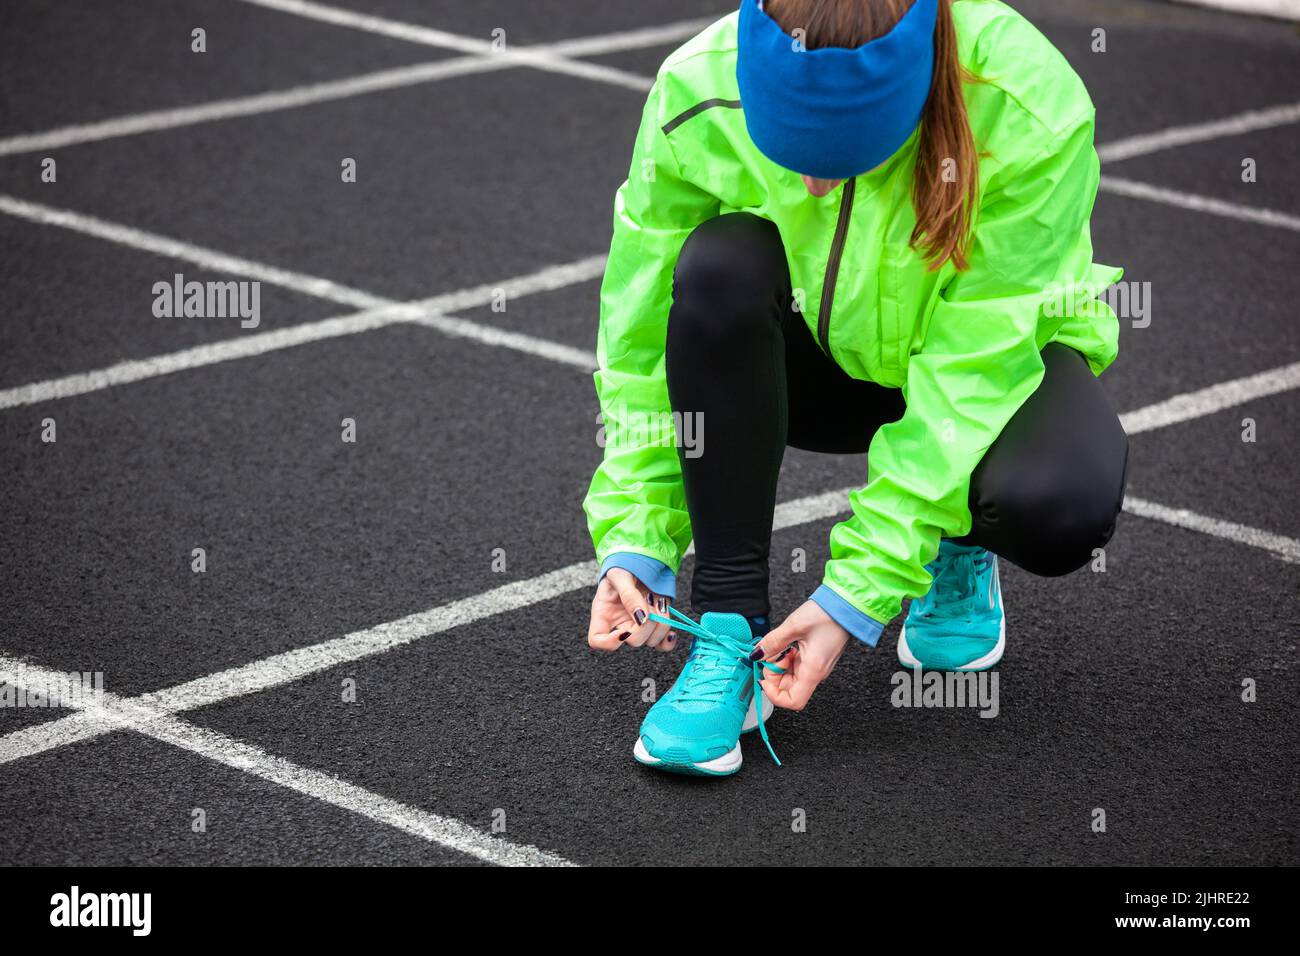 Cropped shot of a woman tying her shoelaces before running on a stadium. Stock Photo